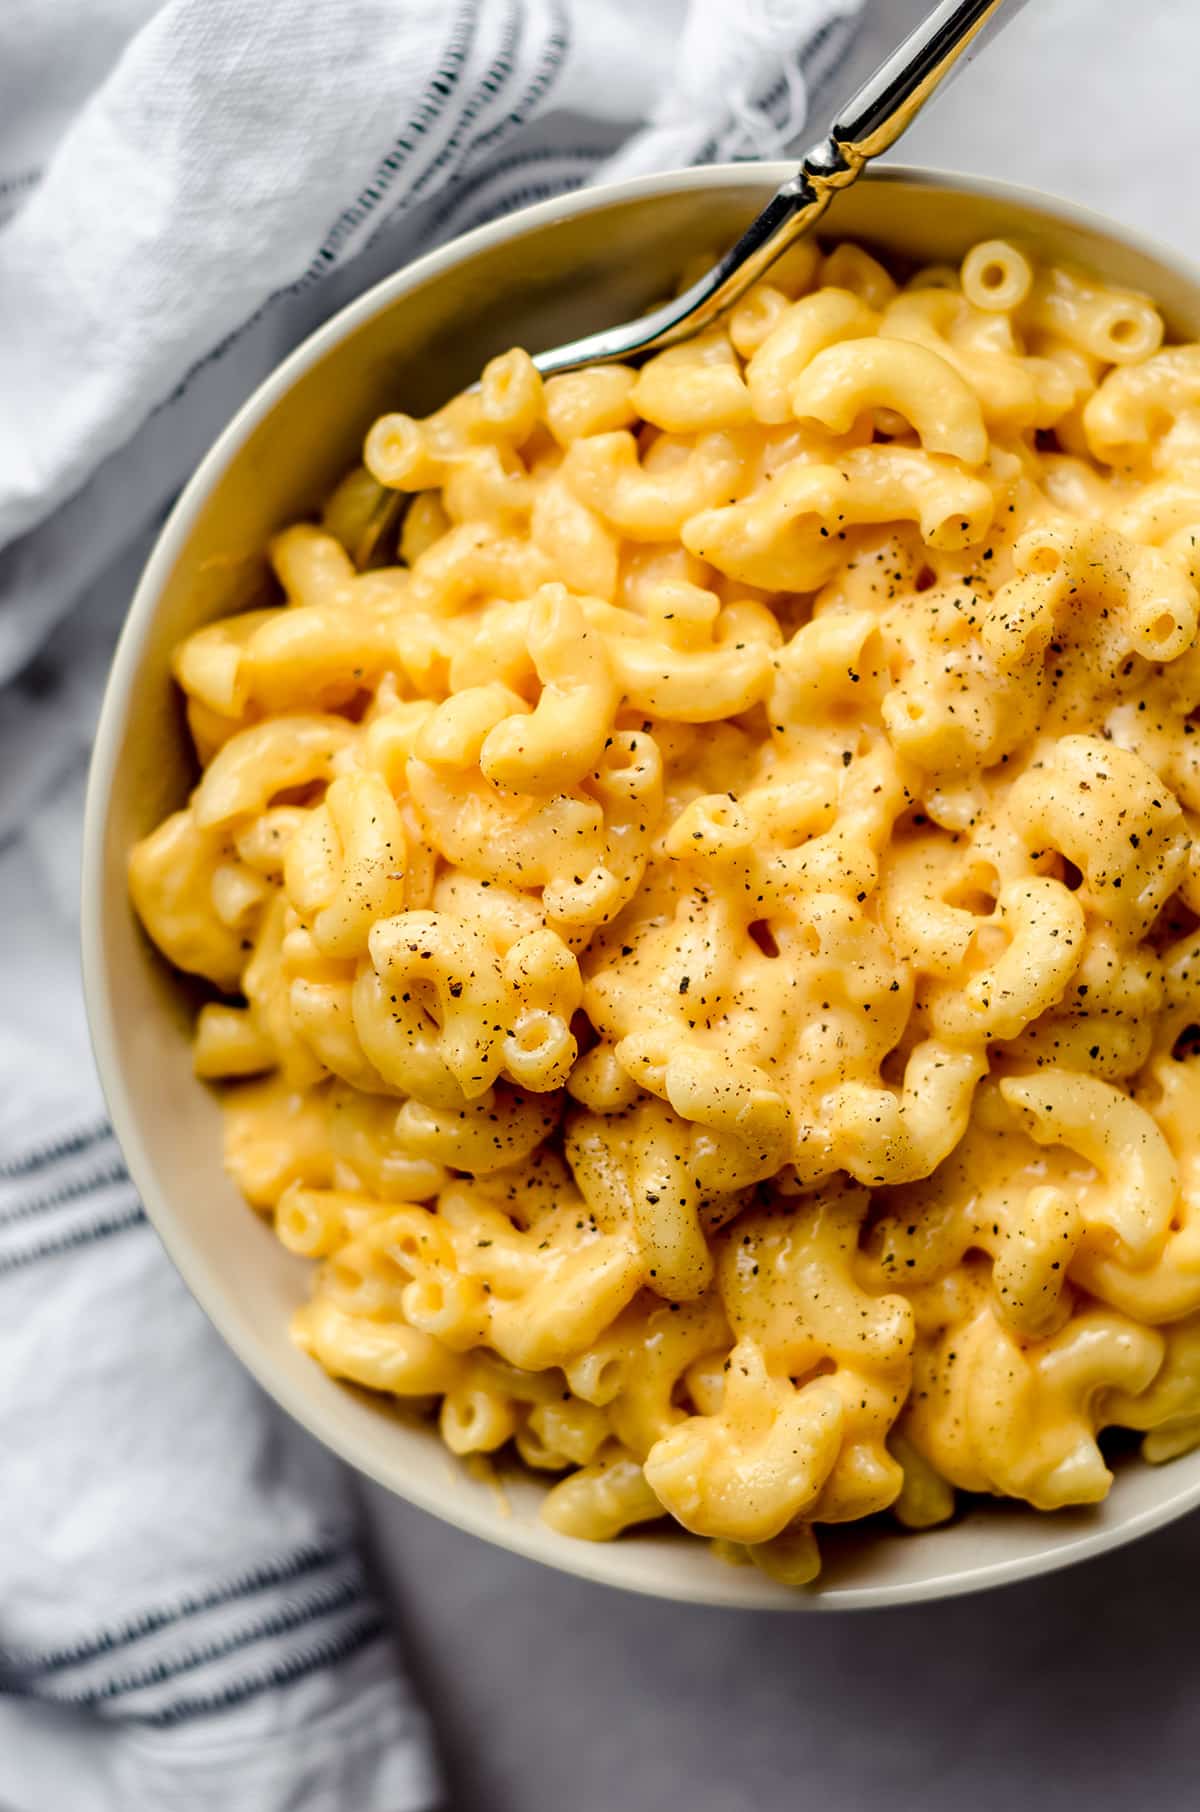 A bowl of homemade Mac and cheese.